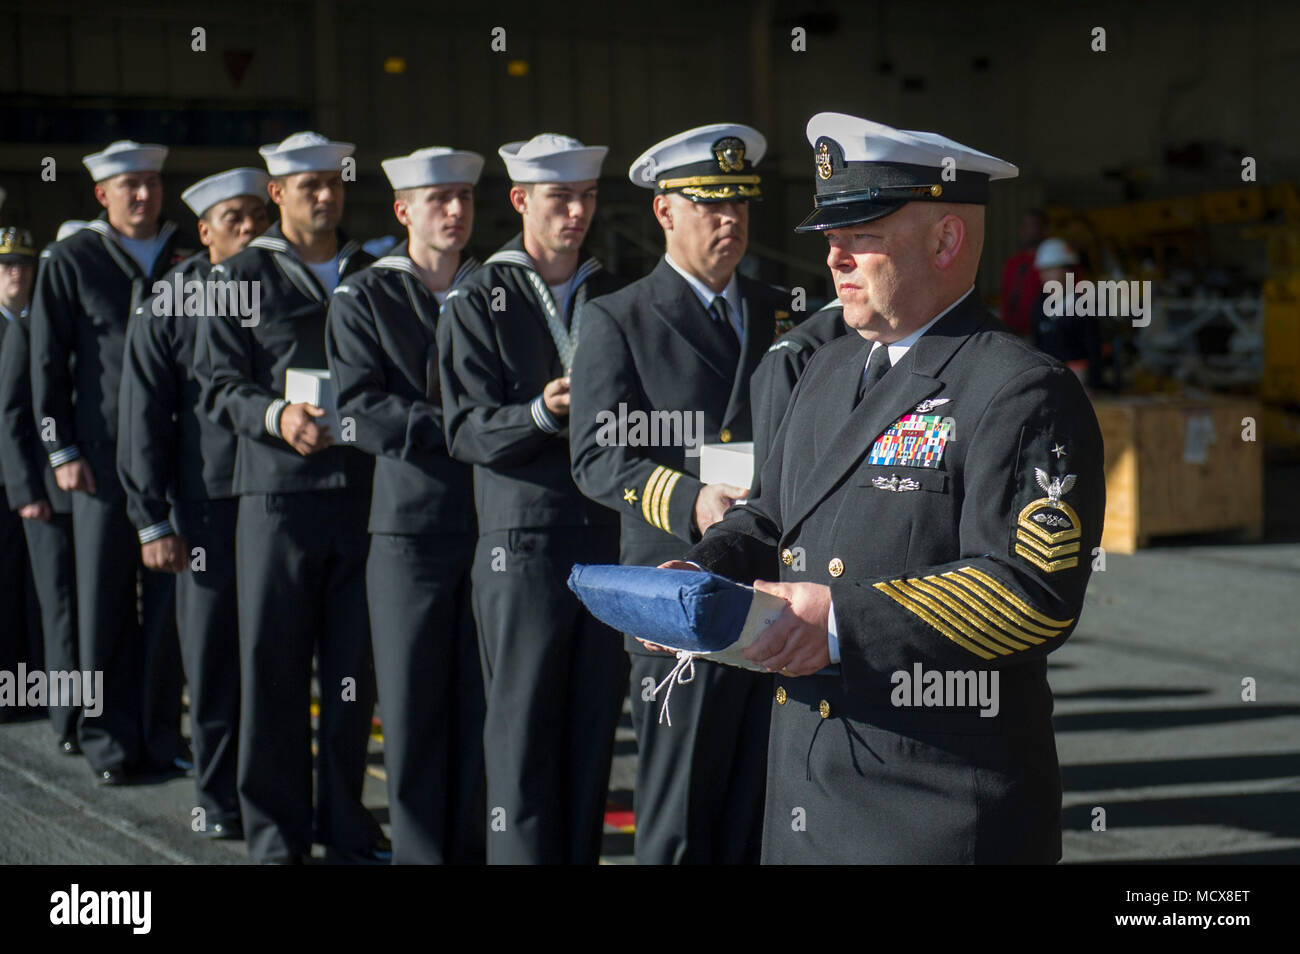 180304-N-ZS023-050 PACIFIC OCEAN (March 4, 2018) Senior Chief Aviation Boatswain’s Mate (Fuel) William Harrison, a native of Lincoln City, Oregon, assigned to the amphibious assault ship USS America (LHA 6), carries remains during a burial-at-sea ceremony on the ship’s starboard elevator. America is underway off the coast of southern California preparing for an ammunitions offload prior to entering a planned maintenance availability period. (U.S. Navy photo by Mass Communication Specialist 3rd Class Vance Hand/Released) Stock Photo